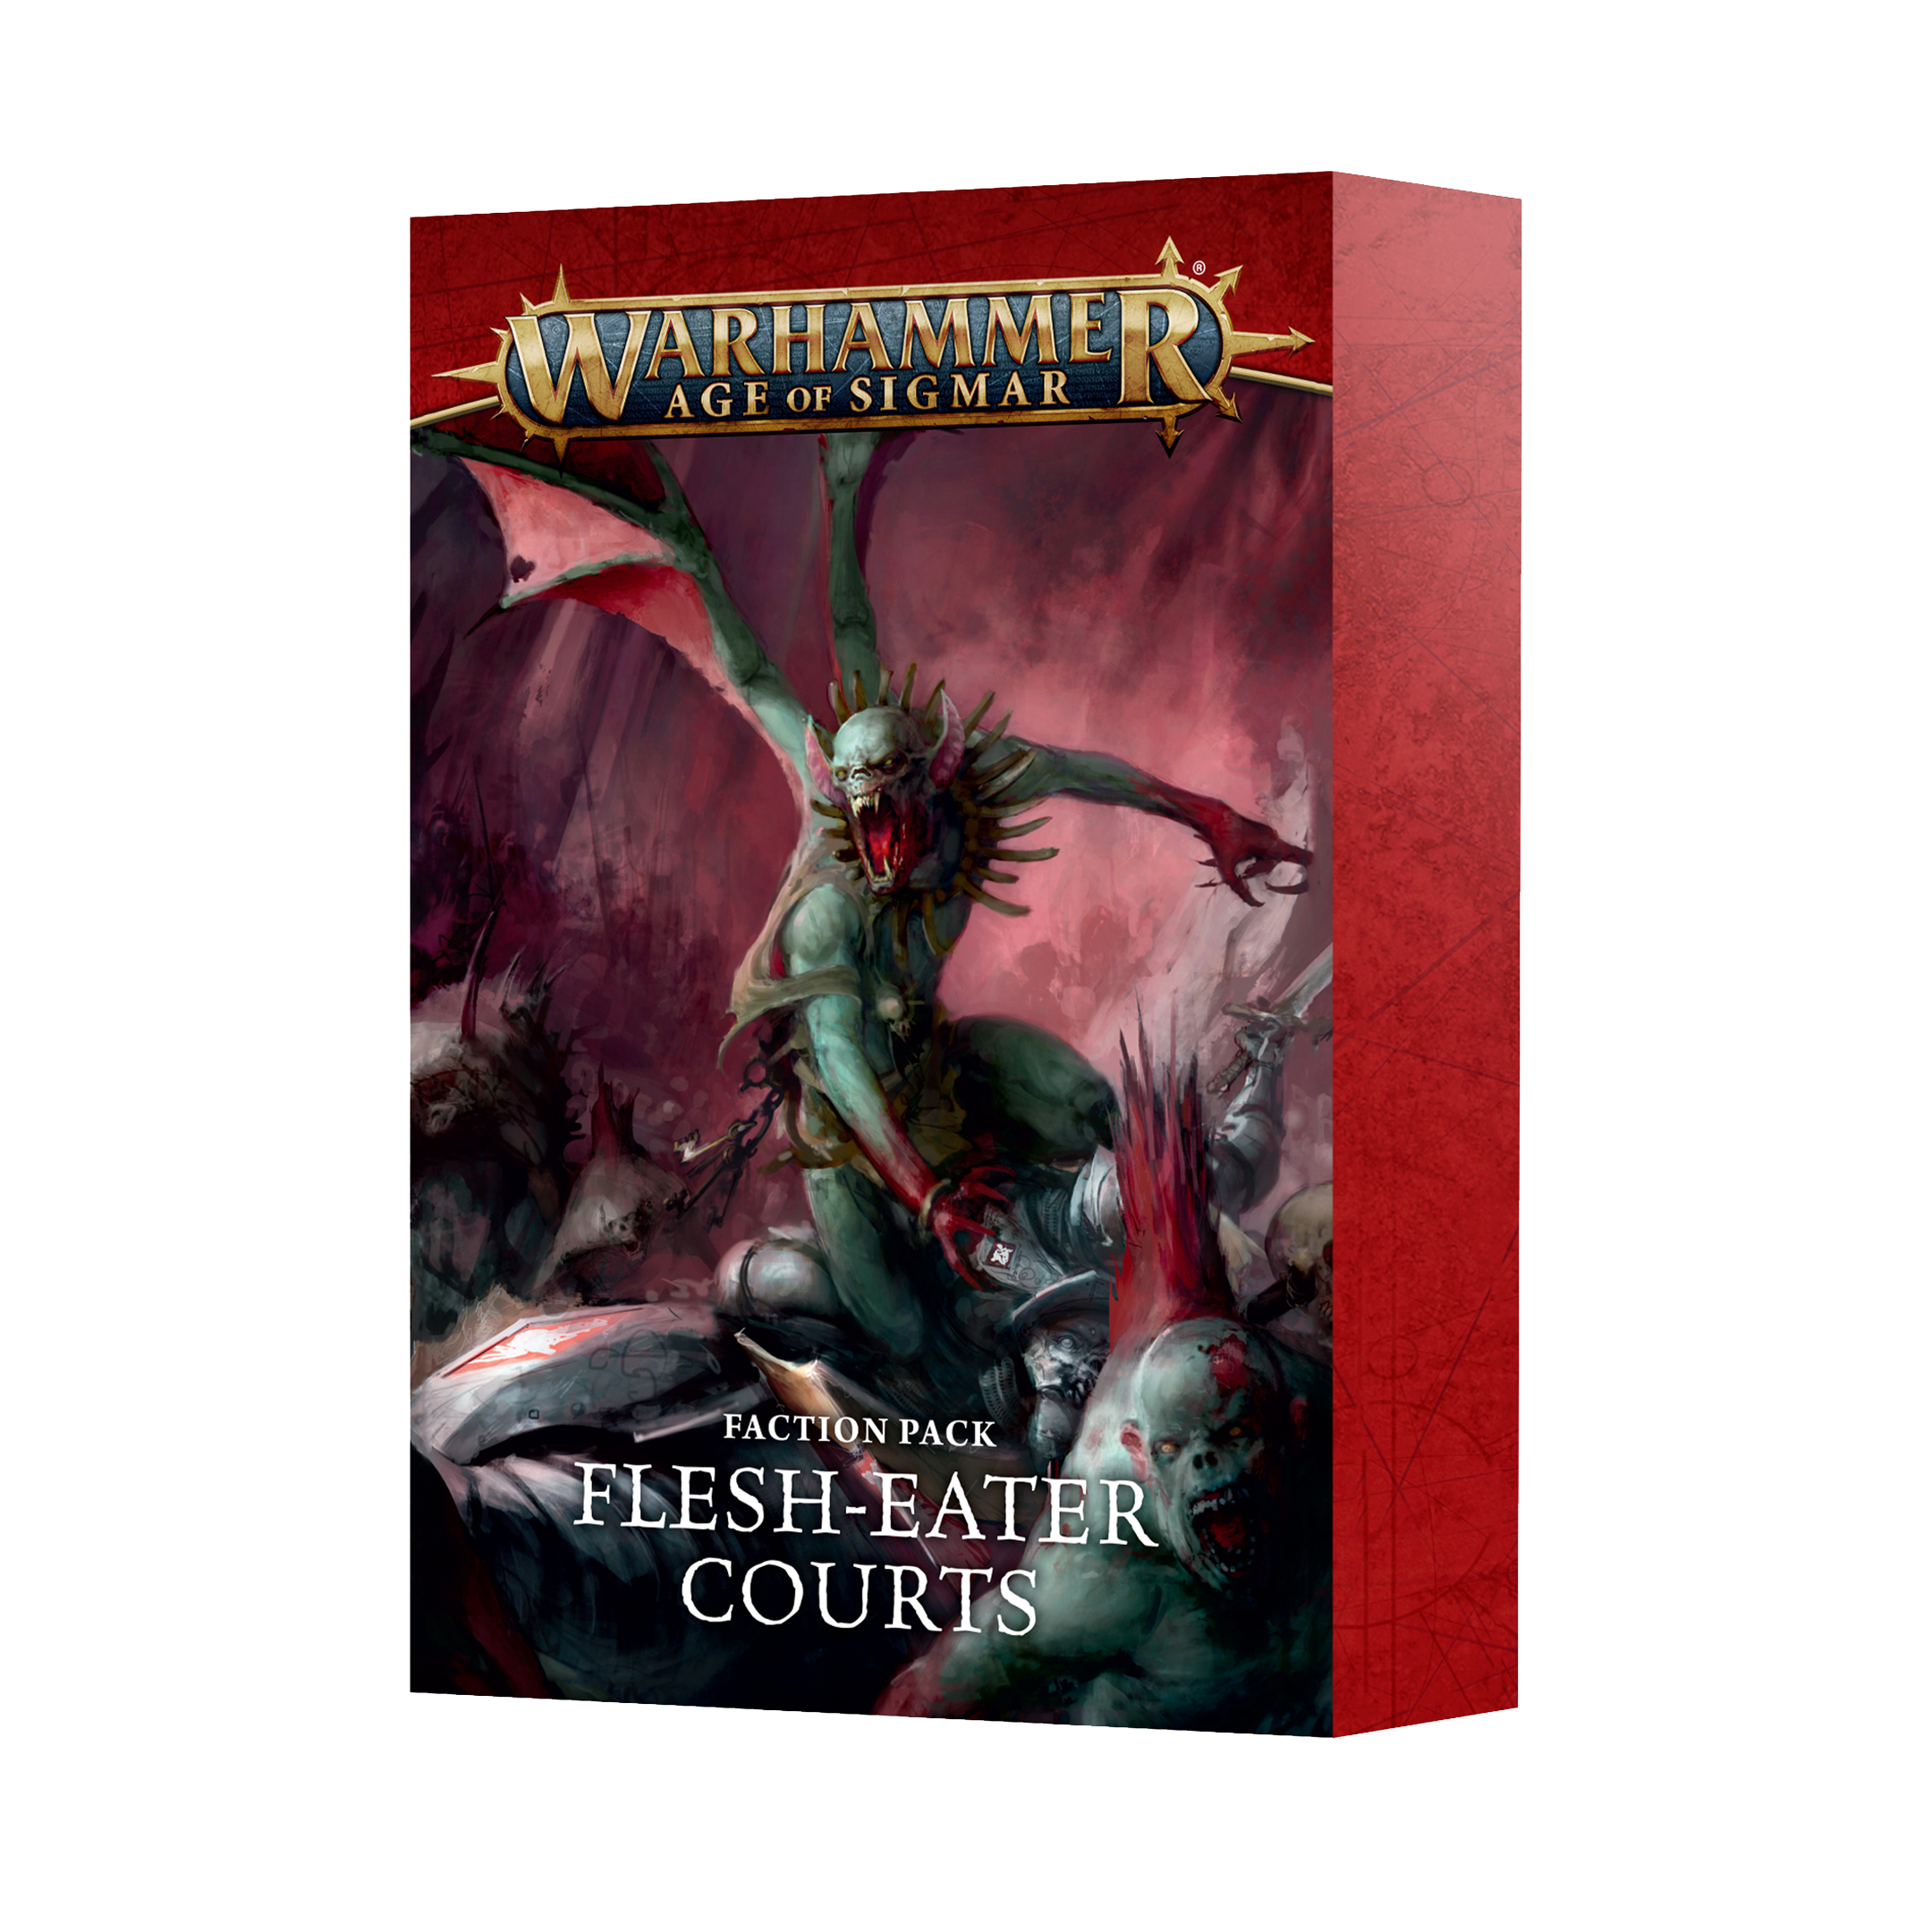 Faction Pack: Flesh-Eater Courts